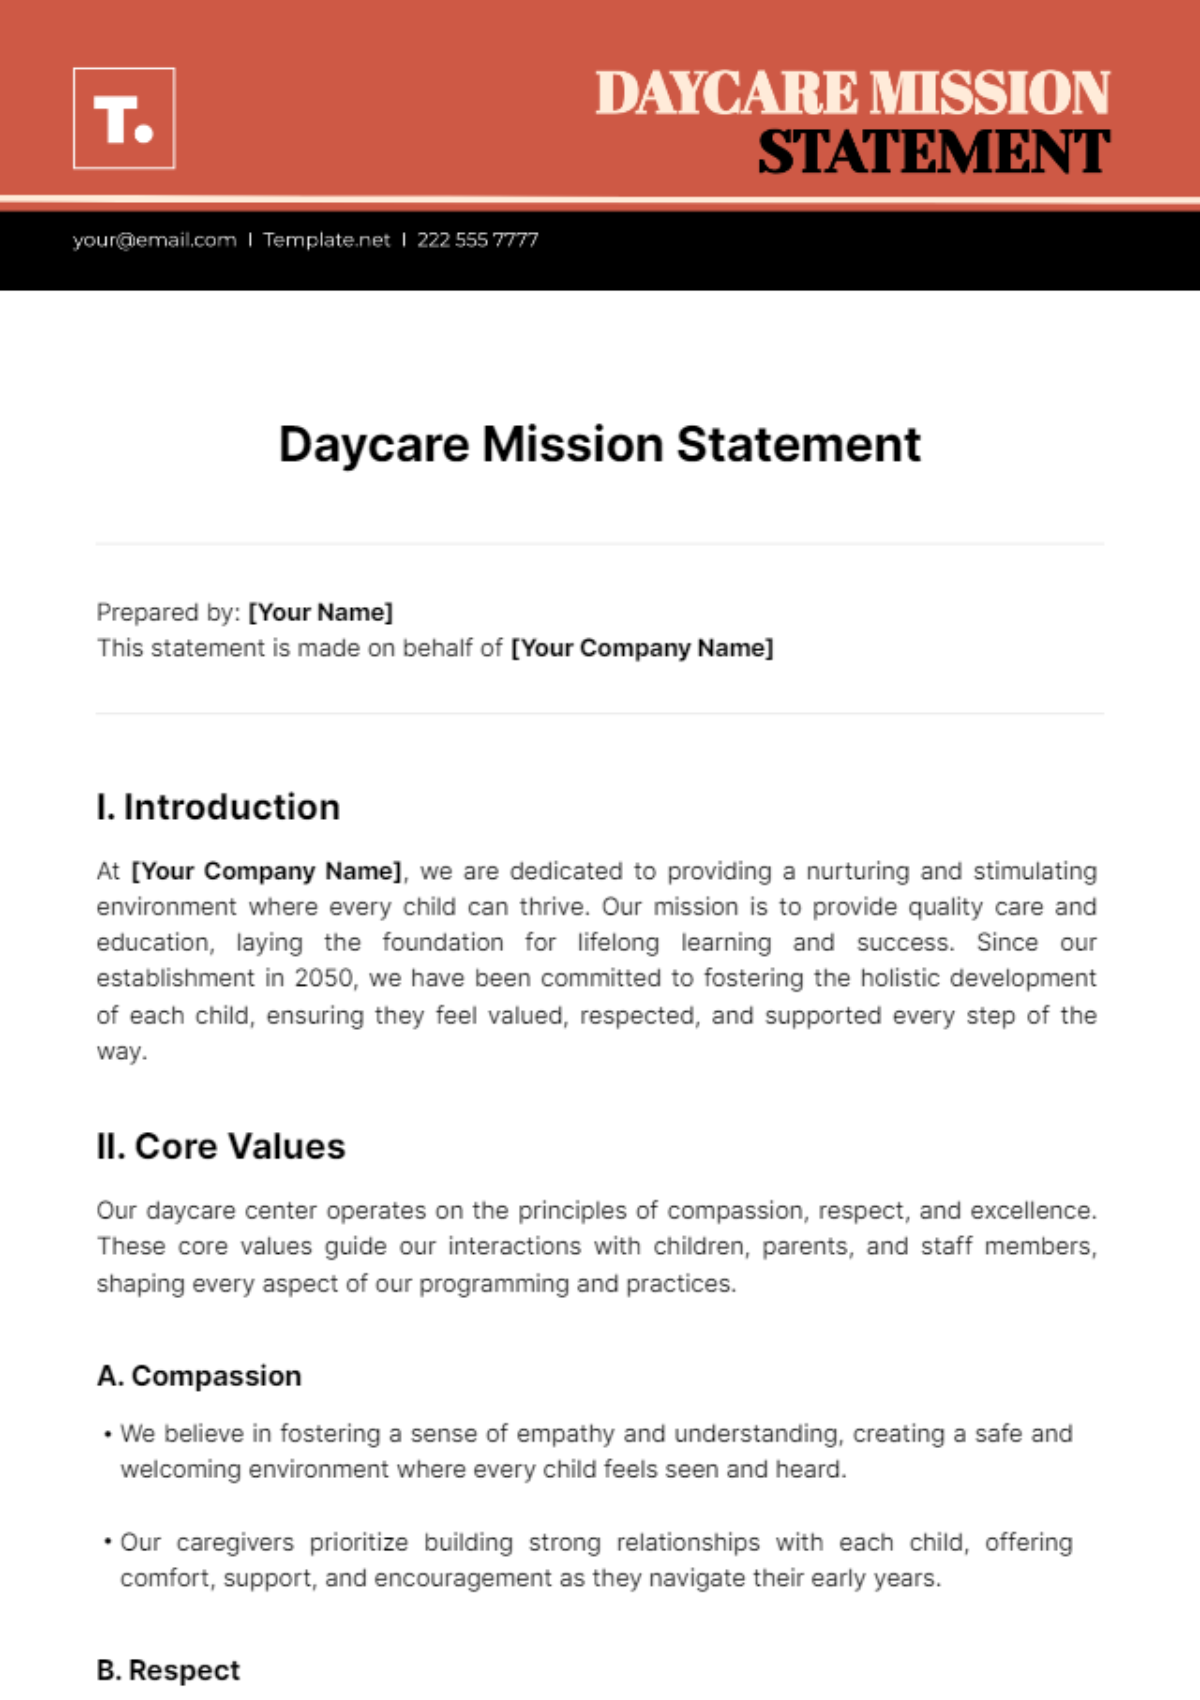 Daycare Mission Statement Template